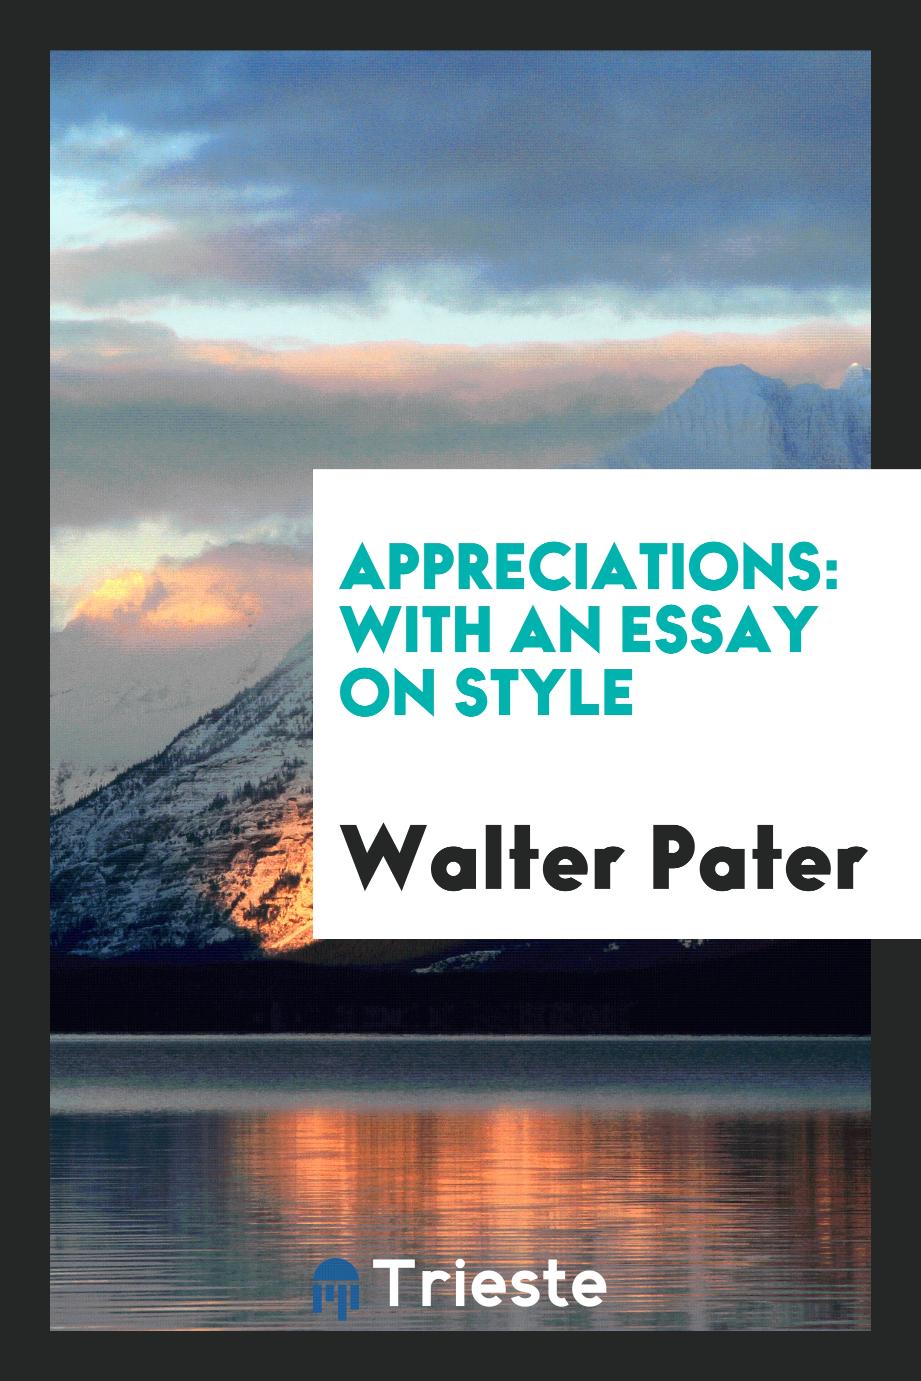 Appreciations: with an essay on style